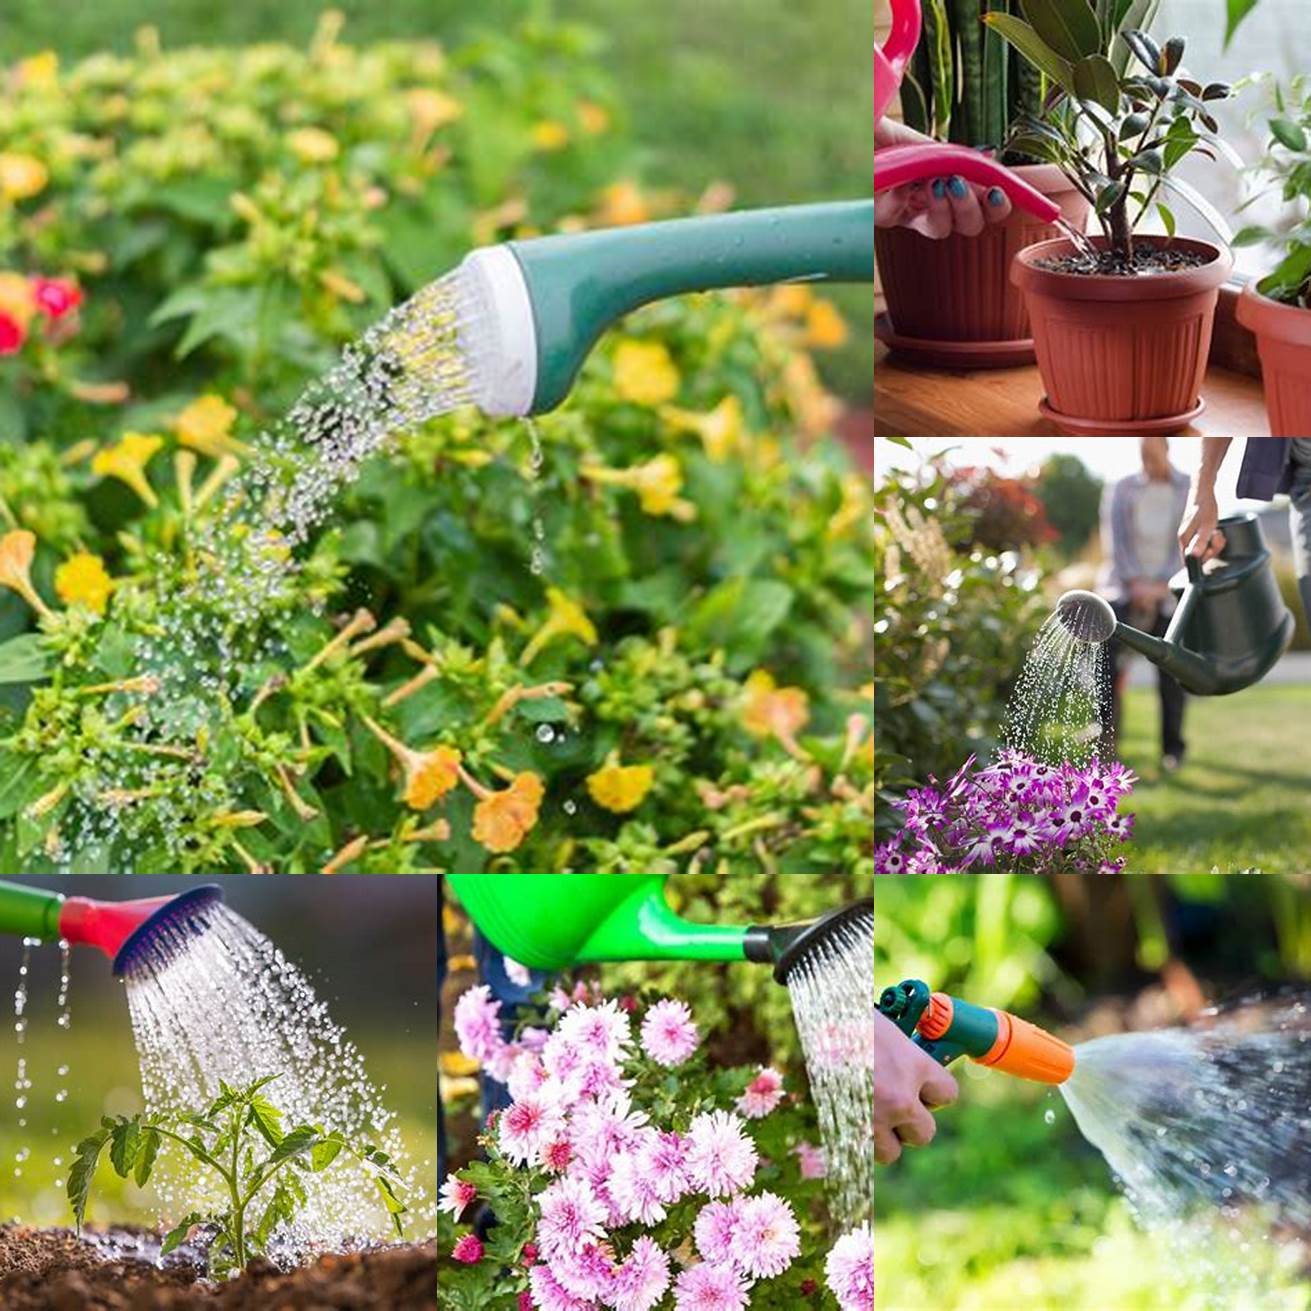 Plants may require more frequent watering